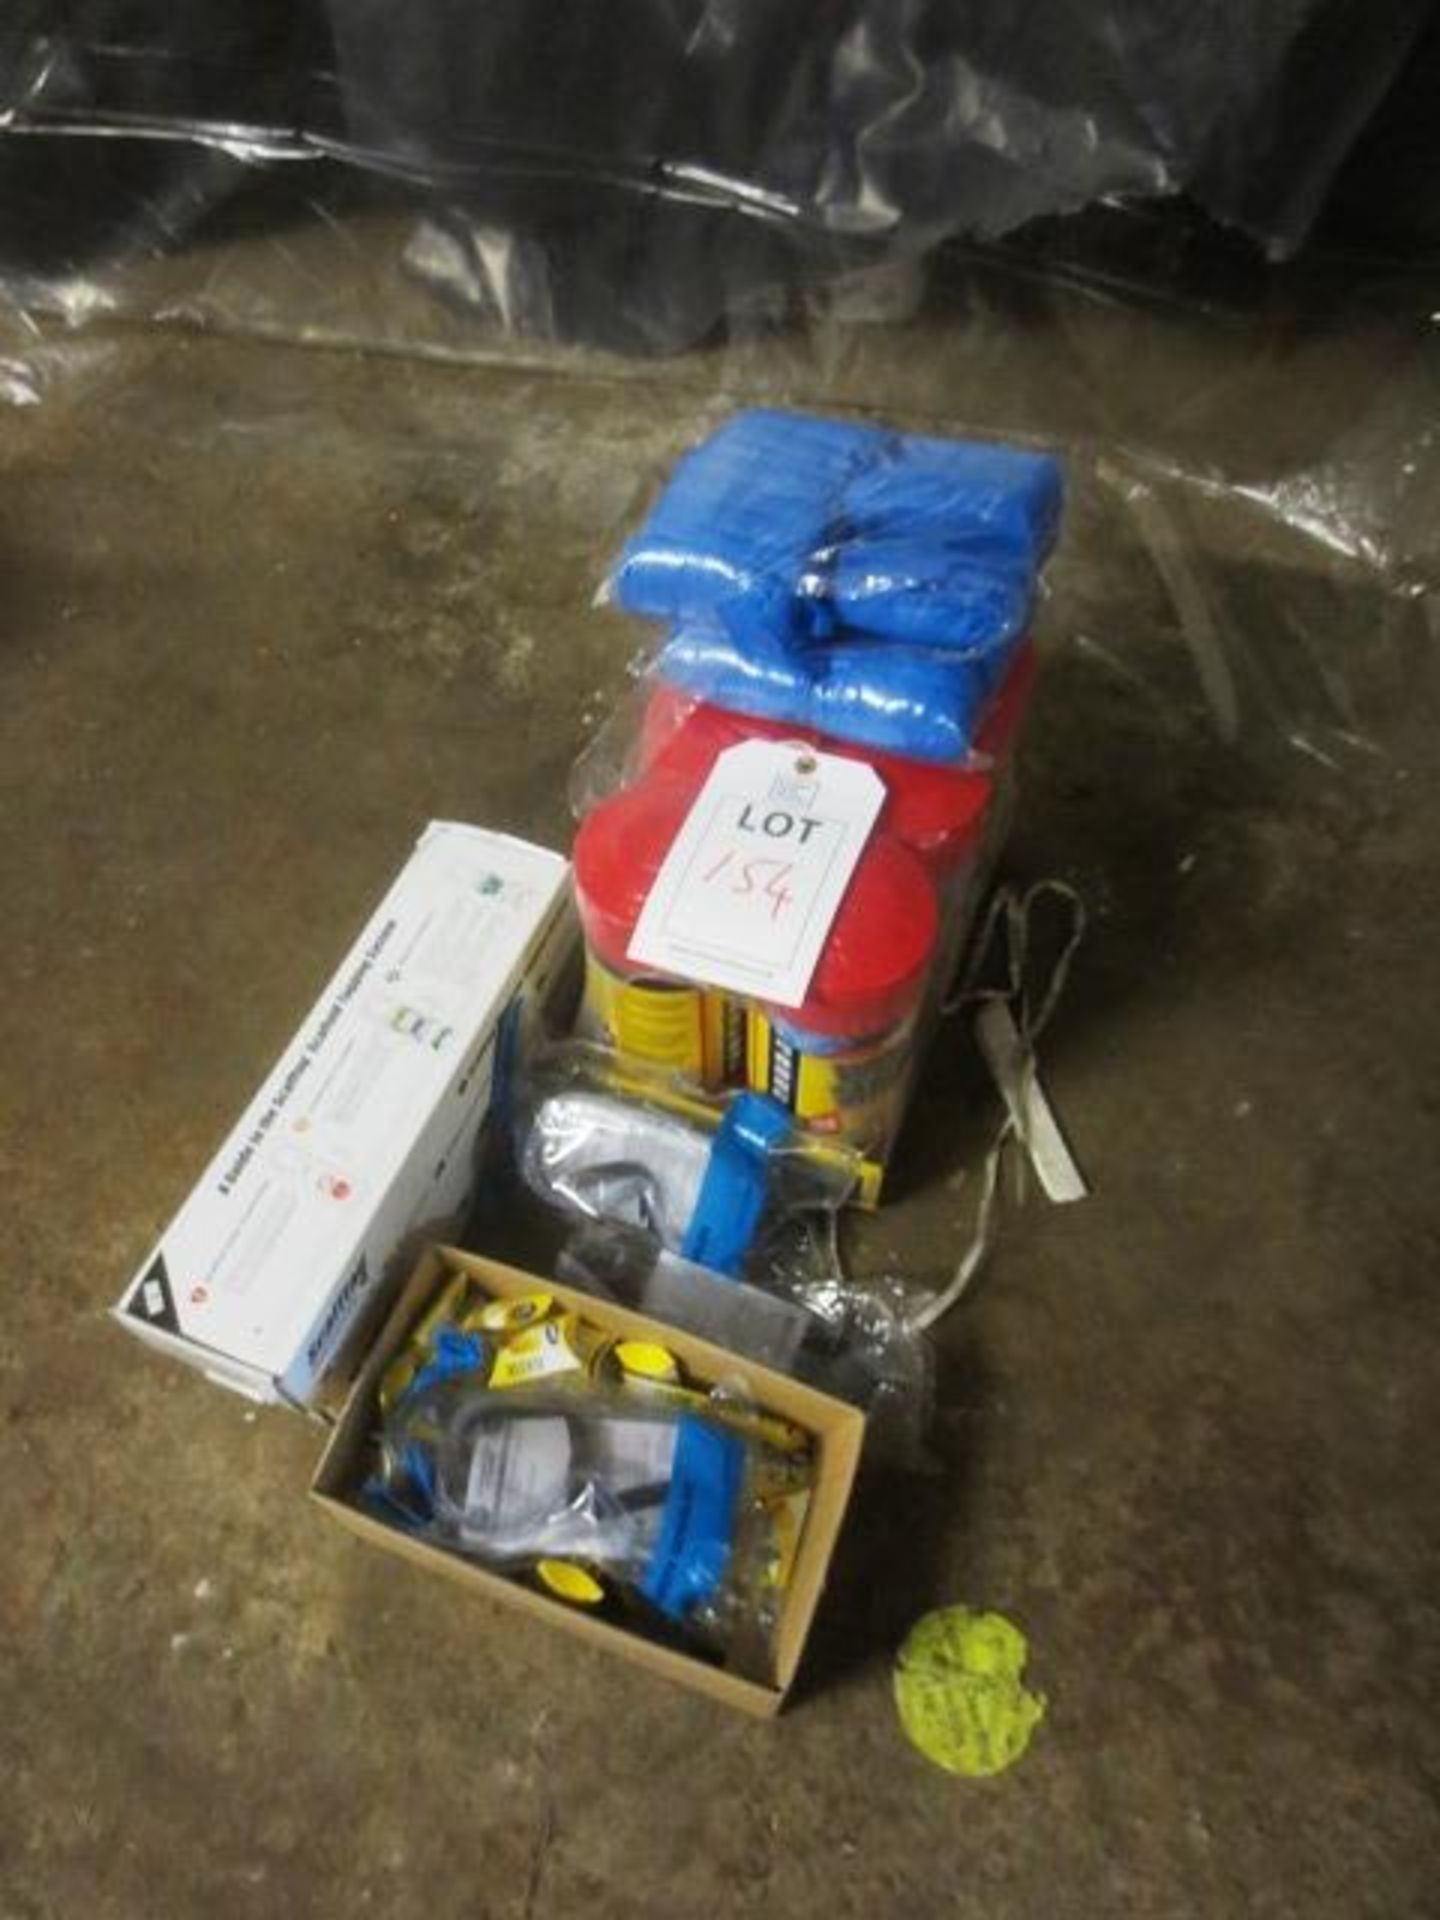 Two boxes of scaffold tags, 6 Wonder Wipe tubs, and assorted PPE